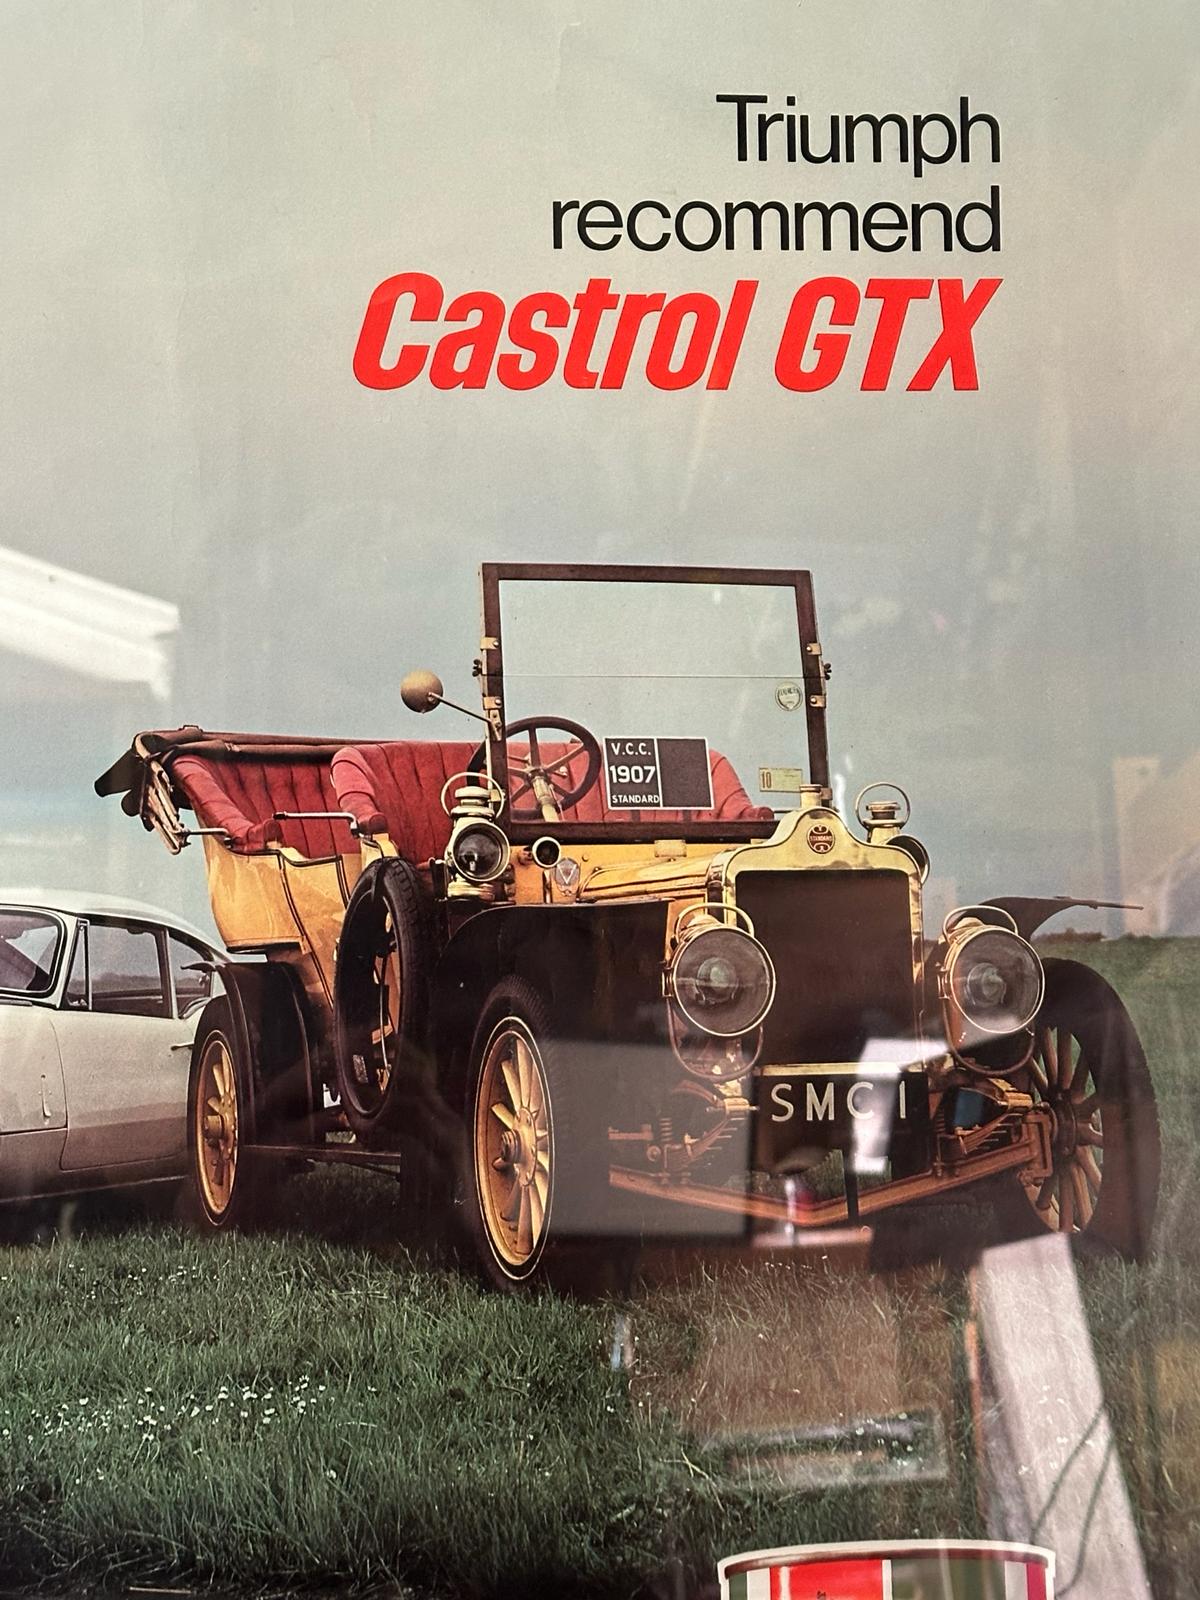 A vintage Triumph Recommend Castrol GTX featuring The 1907 6 cylinder Standard 67cm x 97cm - Image 2 of 4